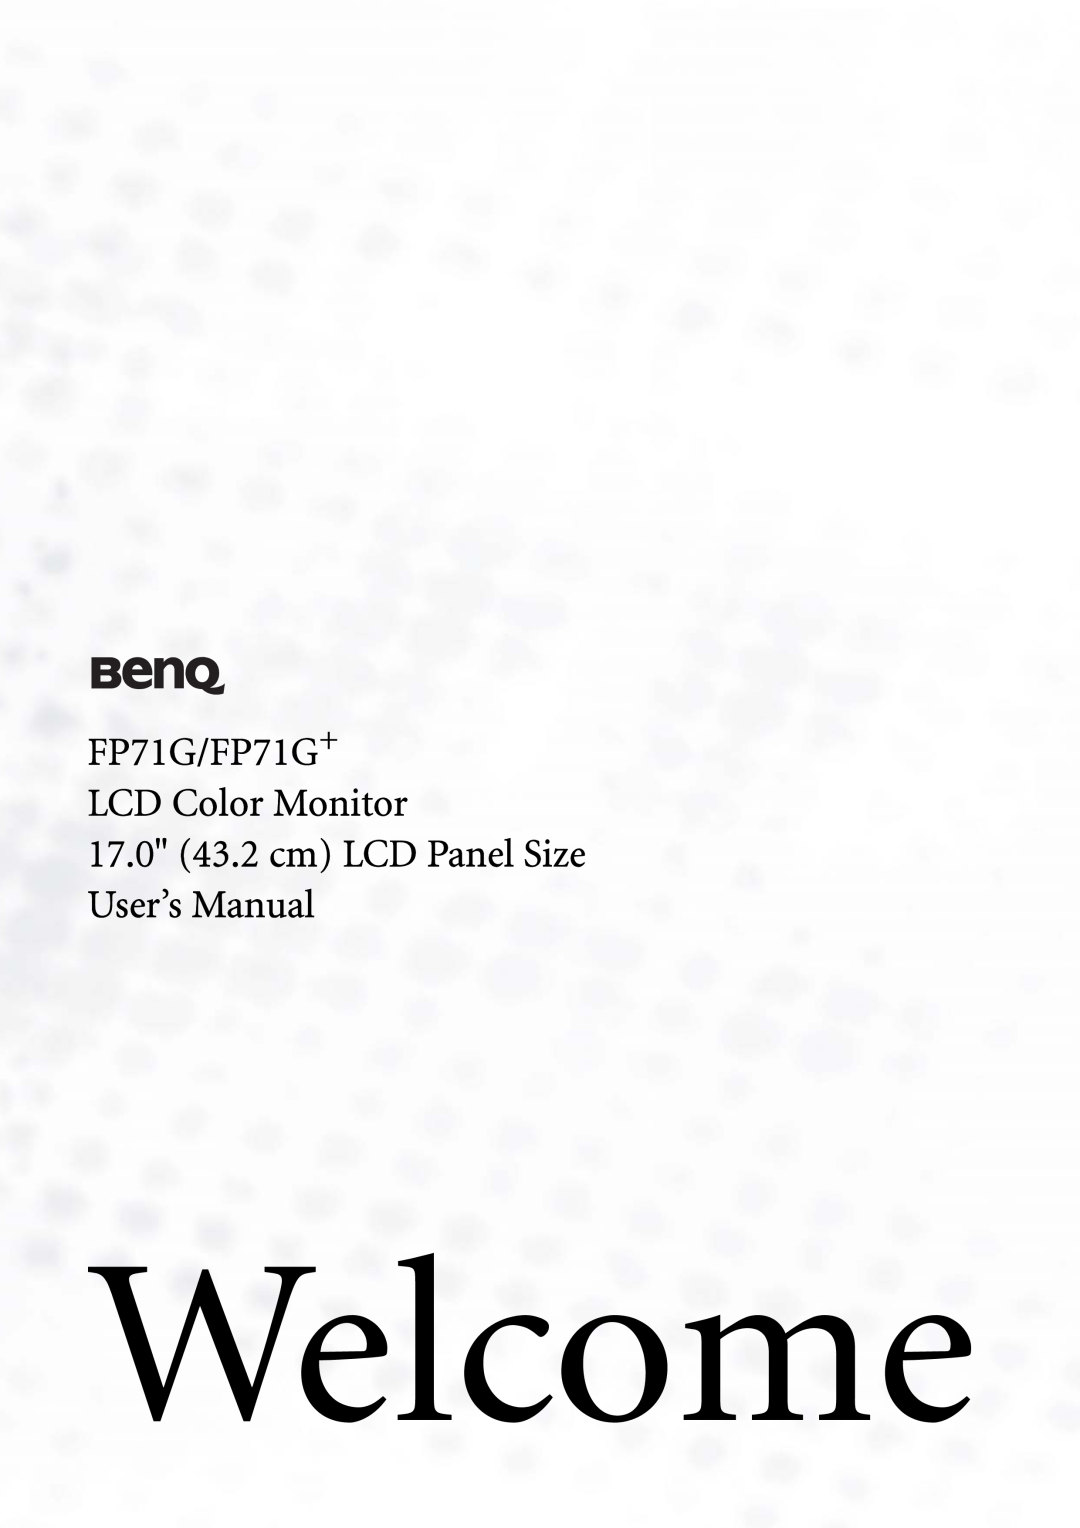 BenQ user manual Welcome, 17.0 43.2 cm LCD Panel Size User’s Manual, FP71G/FP71G+ LCD Color Monitor 